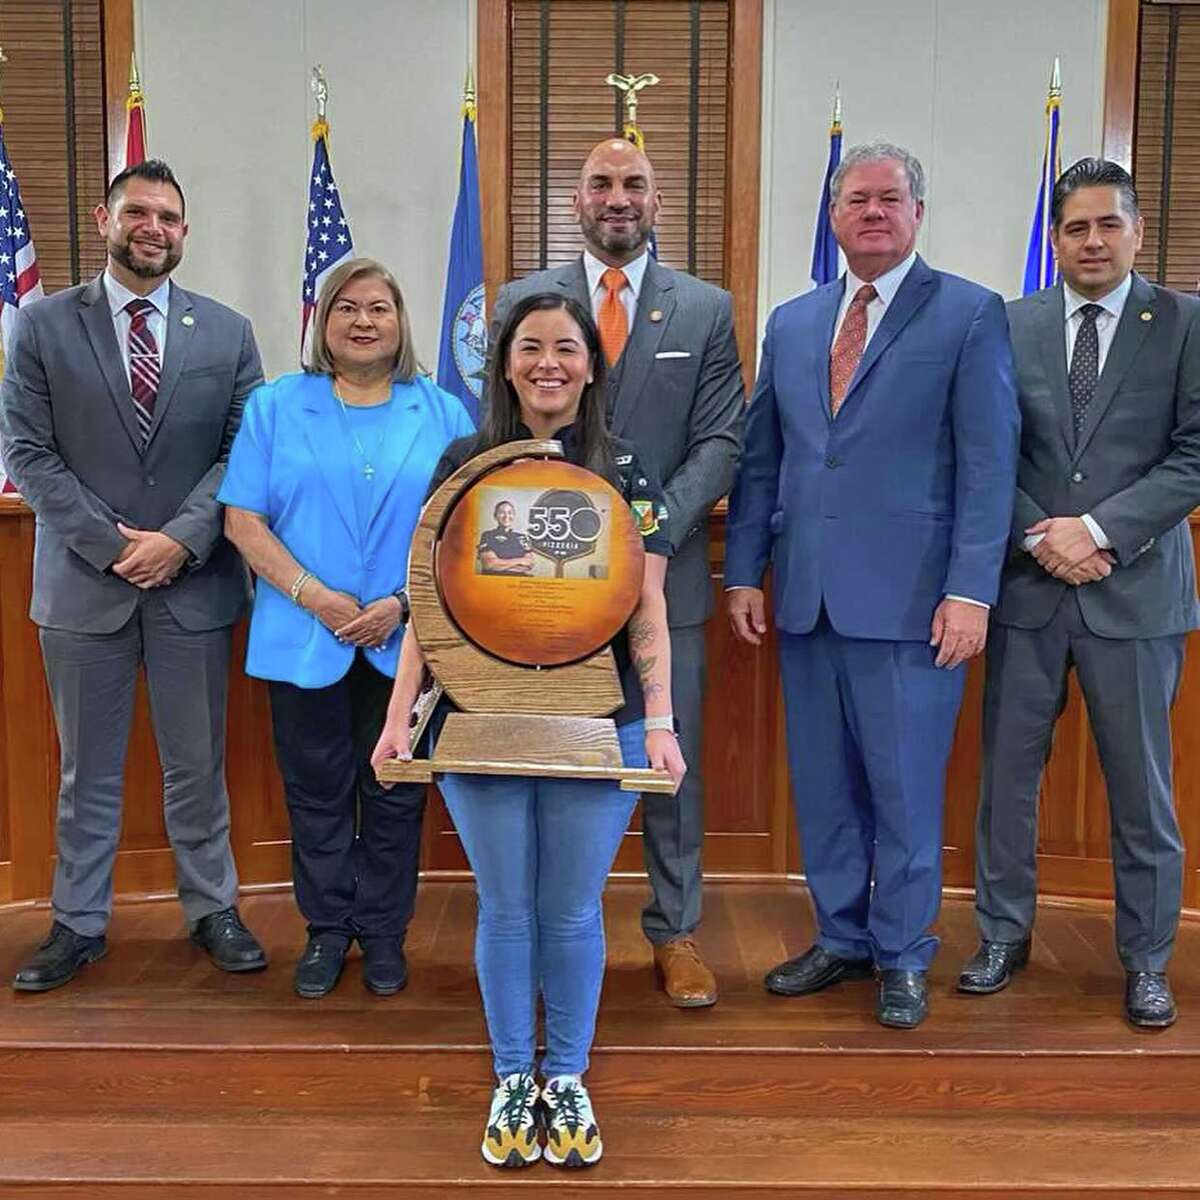 Janet Zapata, owner of 550 Pizzeria, was recognized at the Wednesday, April 11 Webb County Commissioners Court meeting for being named a World Pizza Champion at the International Pizza Expo.